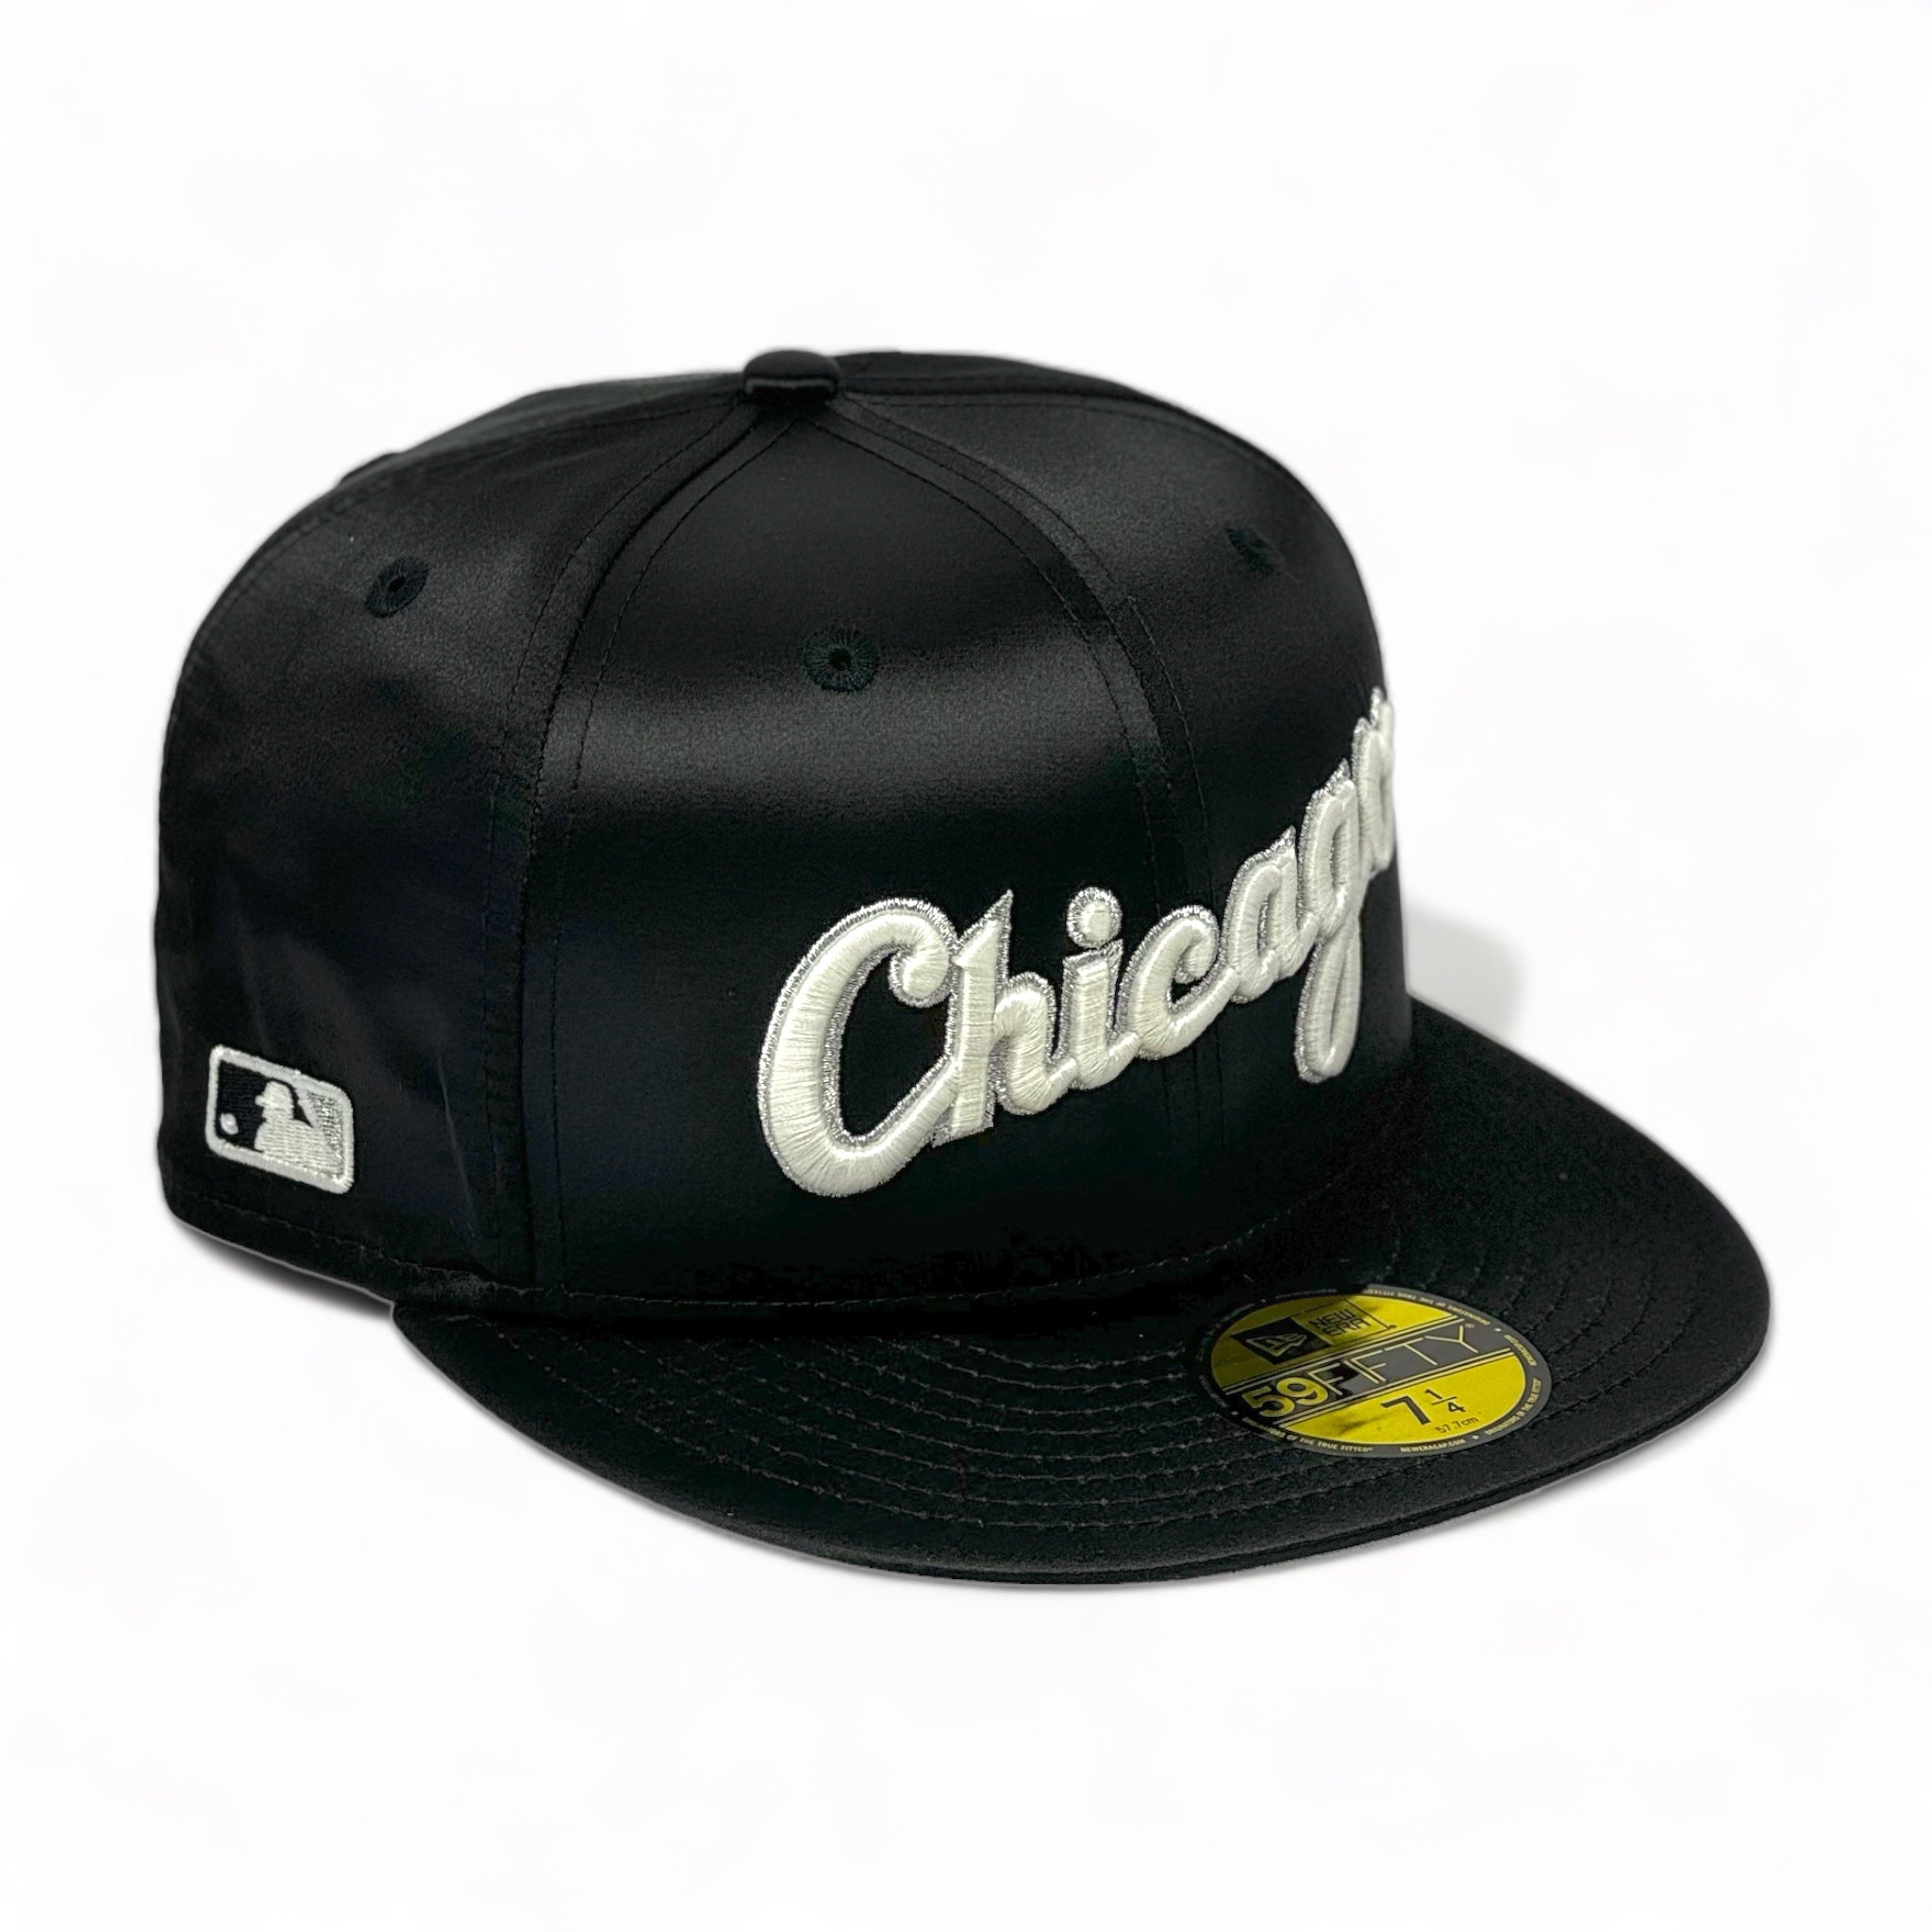 CHICAGO WHITE SOX "SATIN COLLECTION" NEW ERA 59FIFTY FITTED